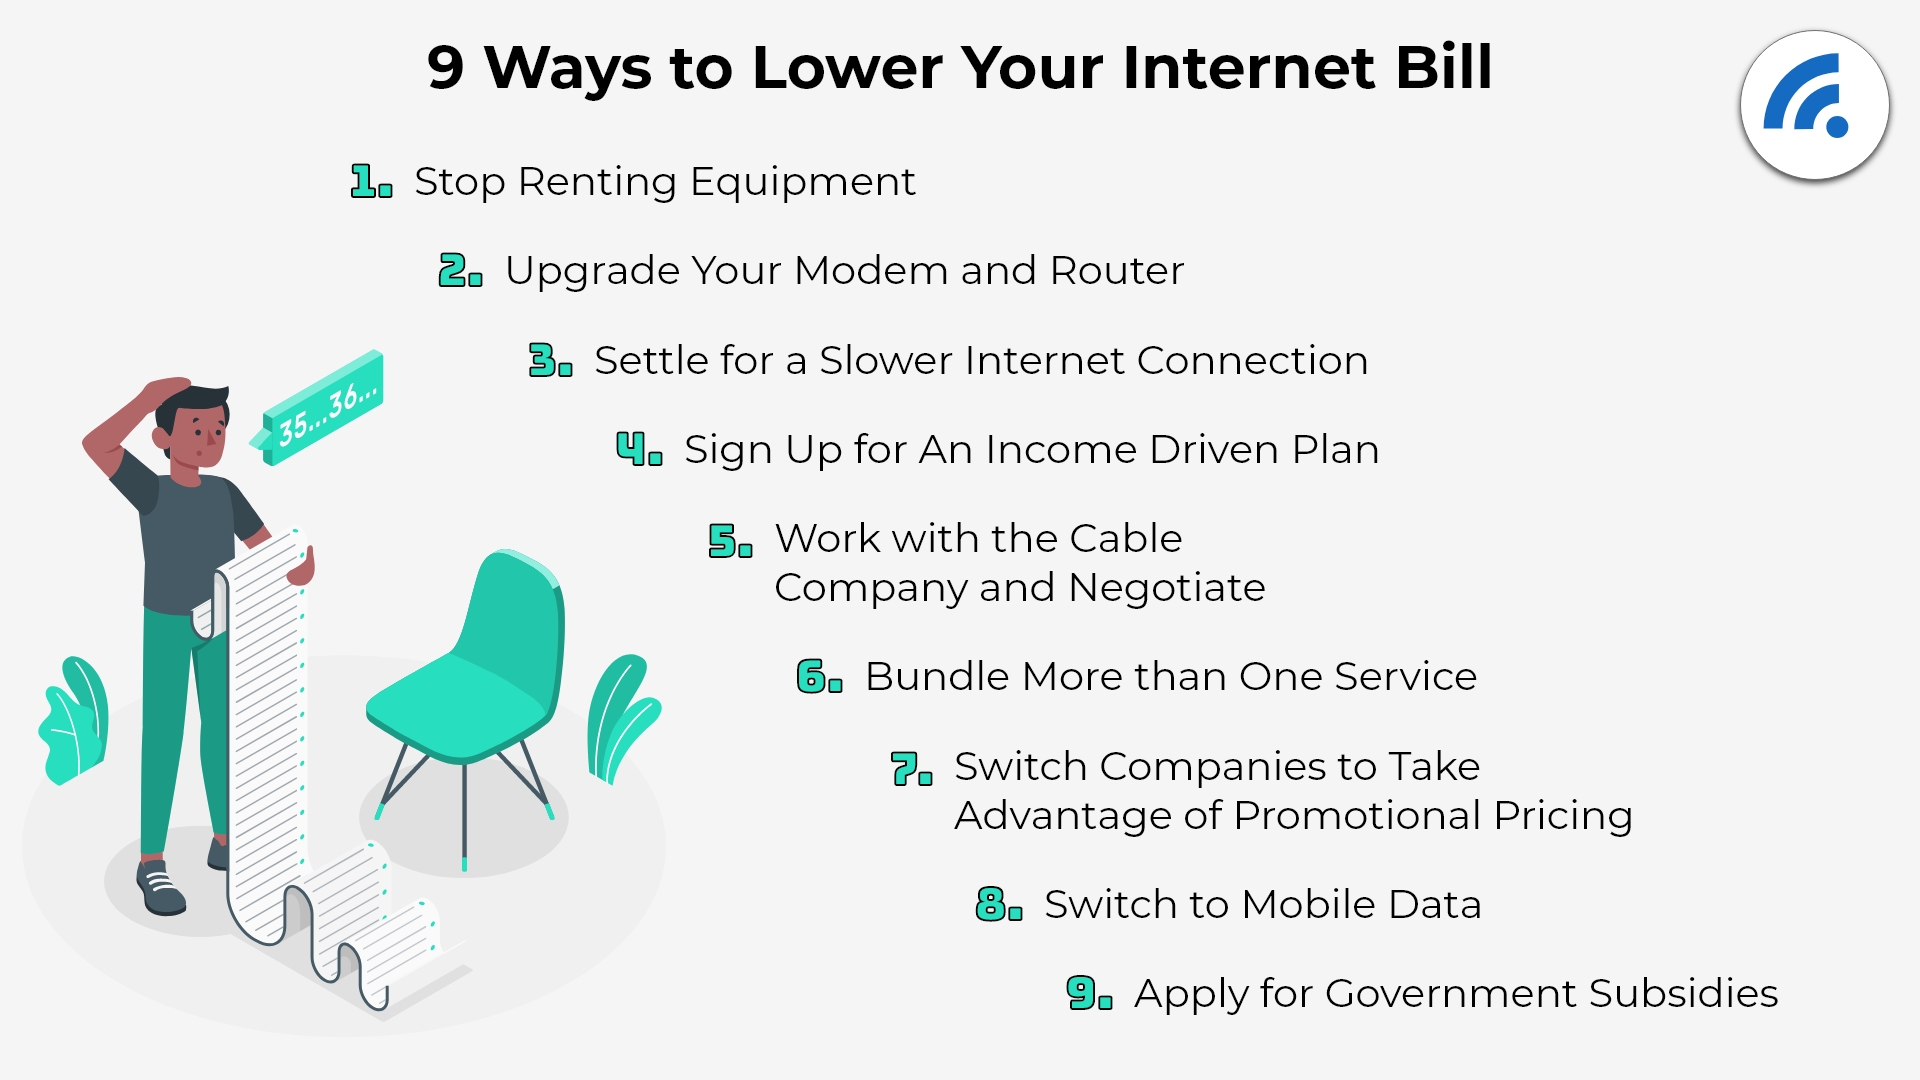 Cheap Internet Guide: What to Do if Internet Bill Has Gone Up 15